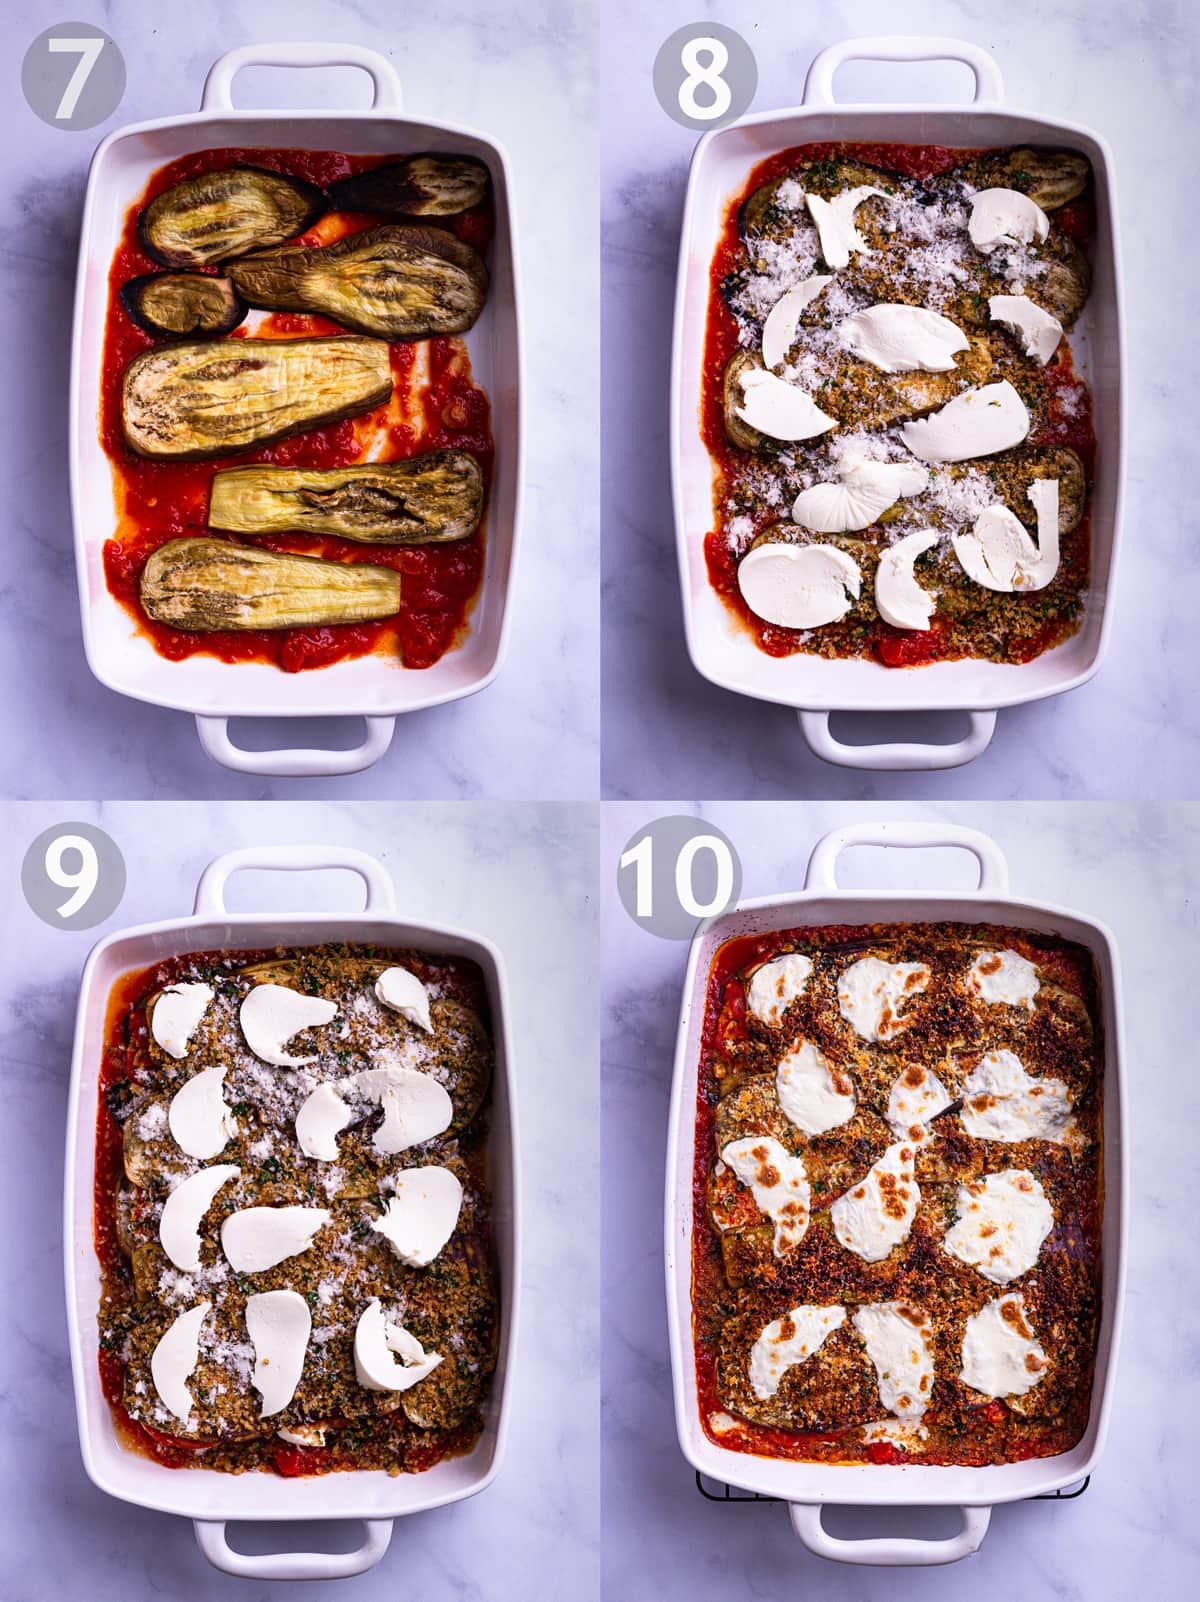 Overhead view of 4 side-by-side pictures showing steps of layering eggplant parm.